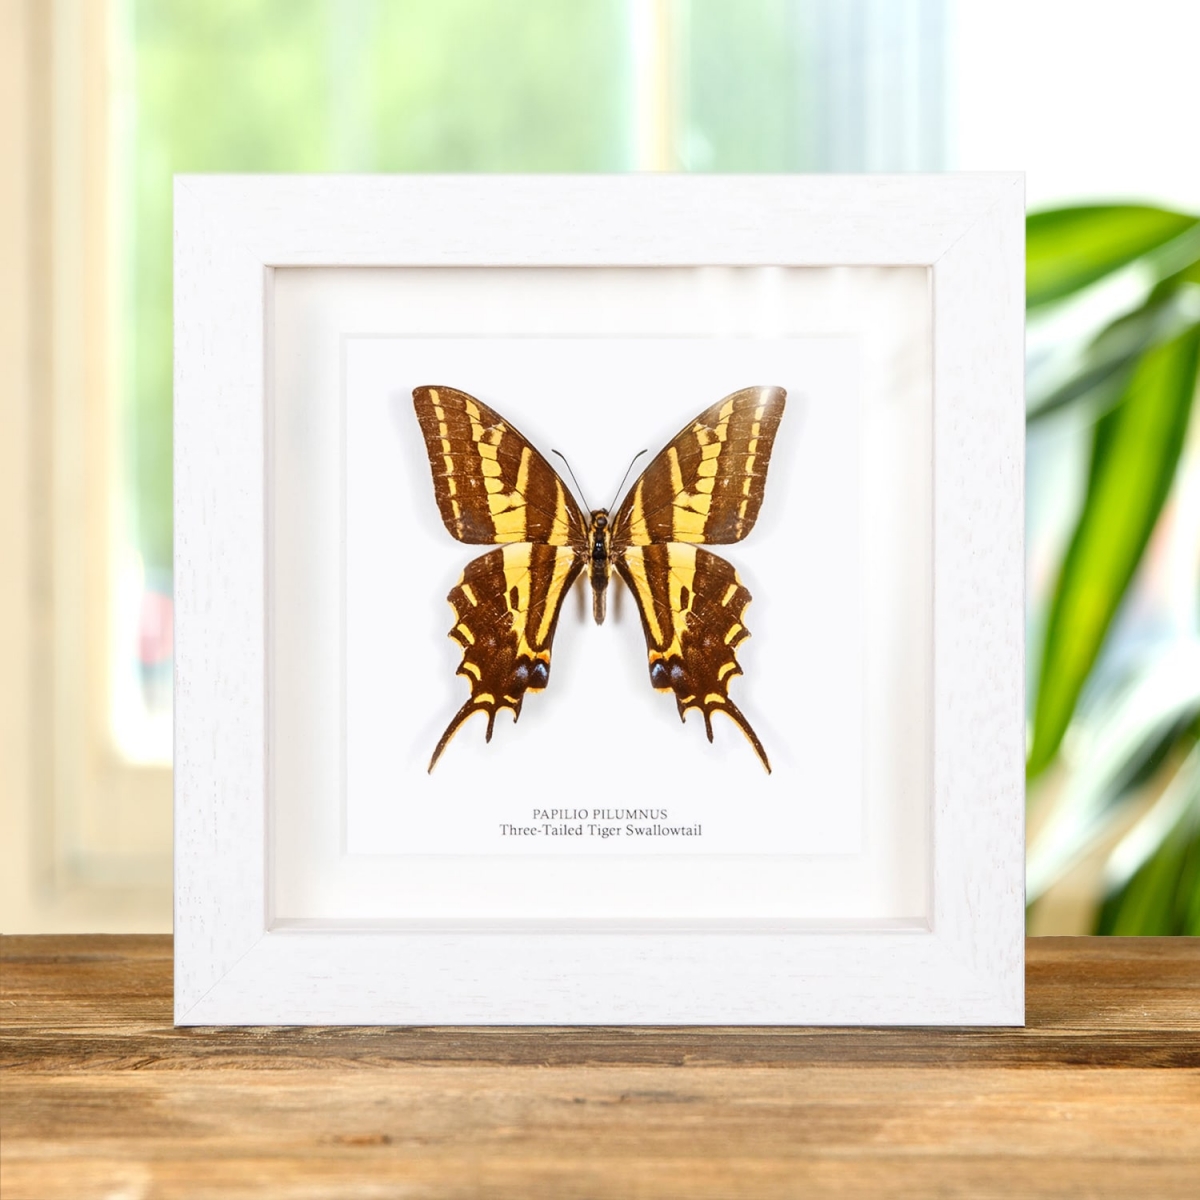 Three-Tailed Tiger Swallowtail Butterfly In Box Frame (Papilio pilumnus)